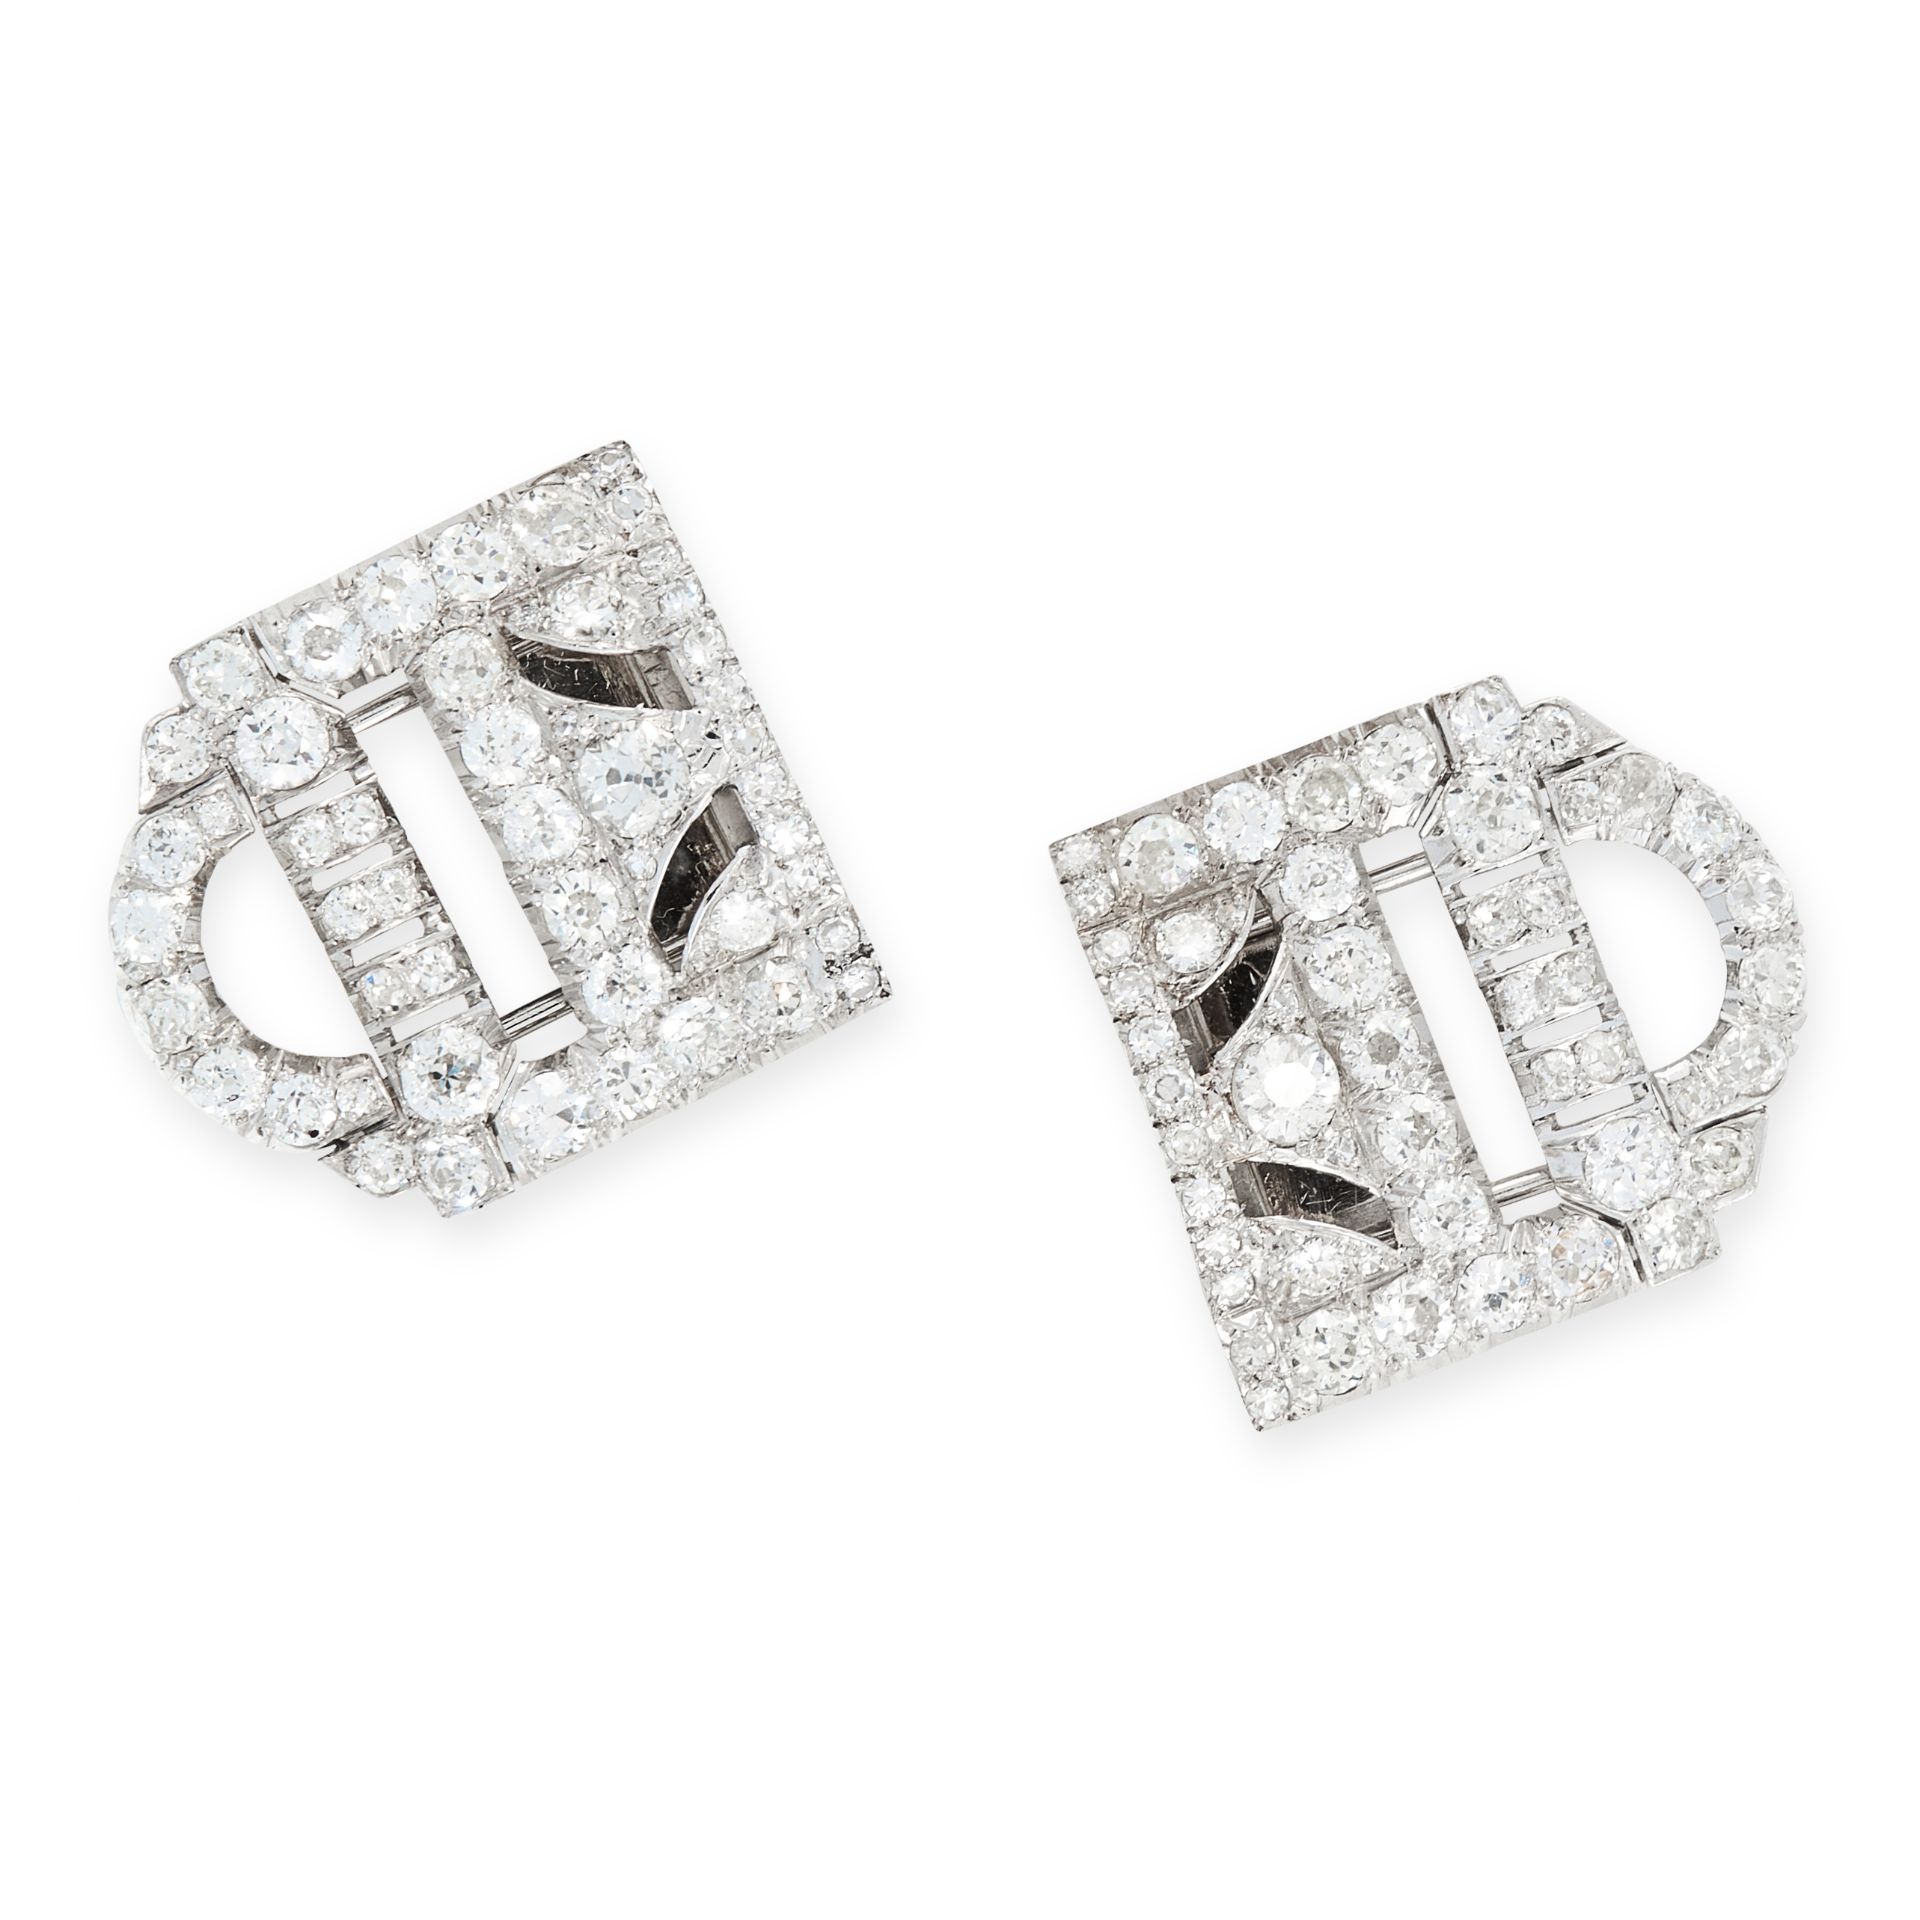 A PAIR OF ART DECO DIAMOND CLIP BROOCHES in shield design, set with old and single cut diamonds, all